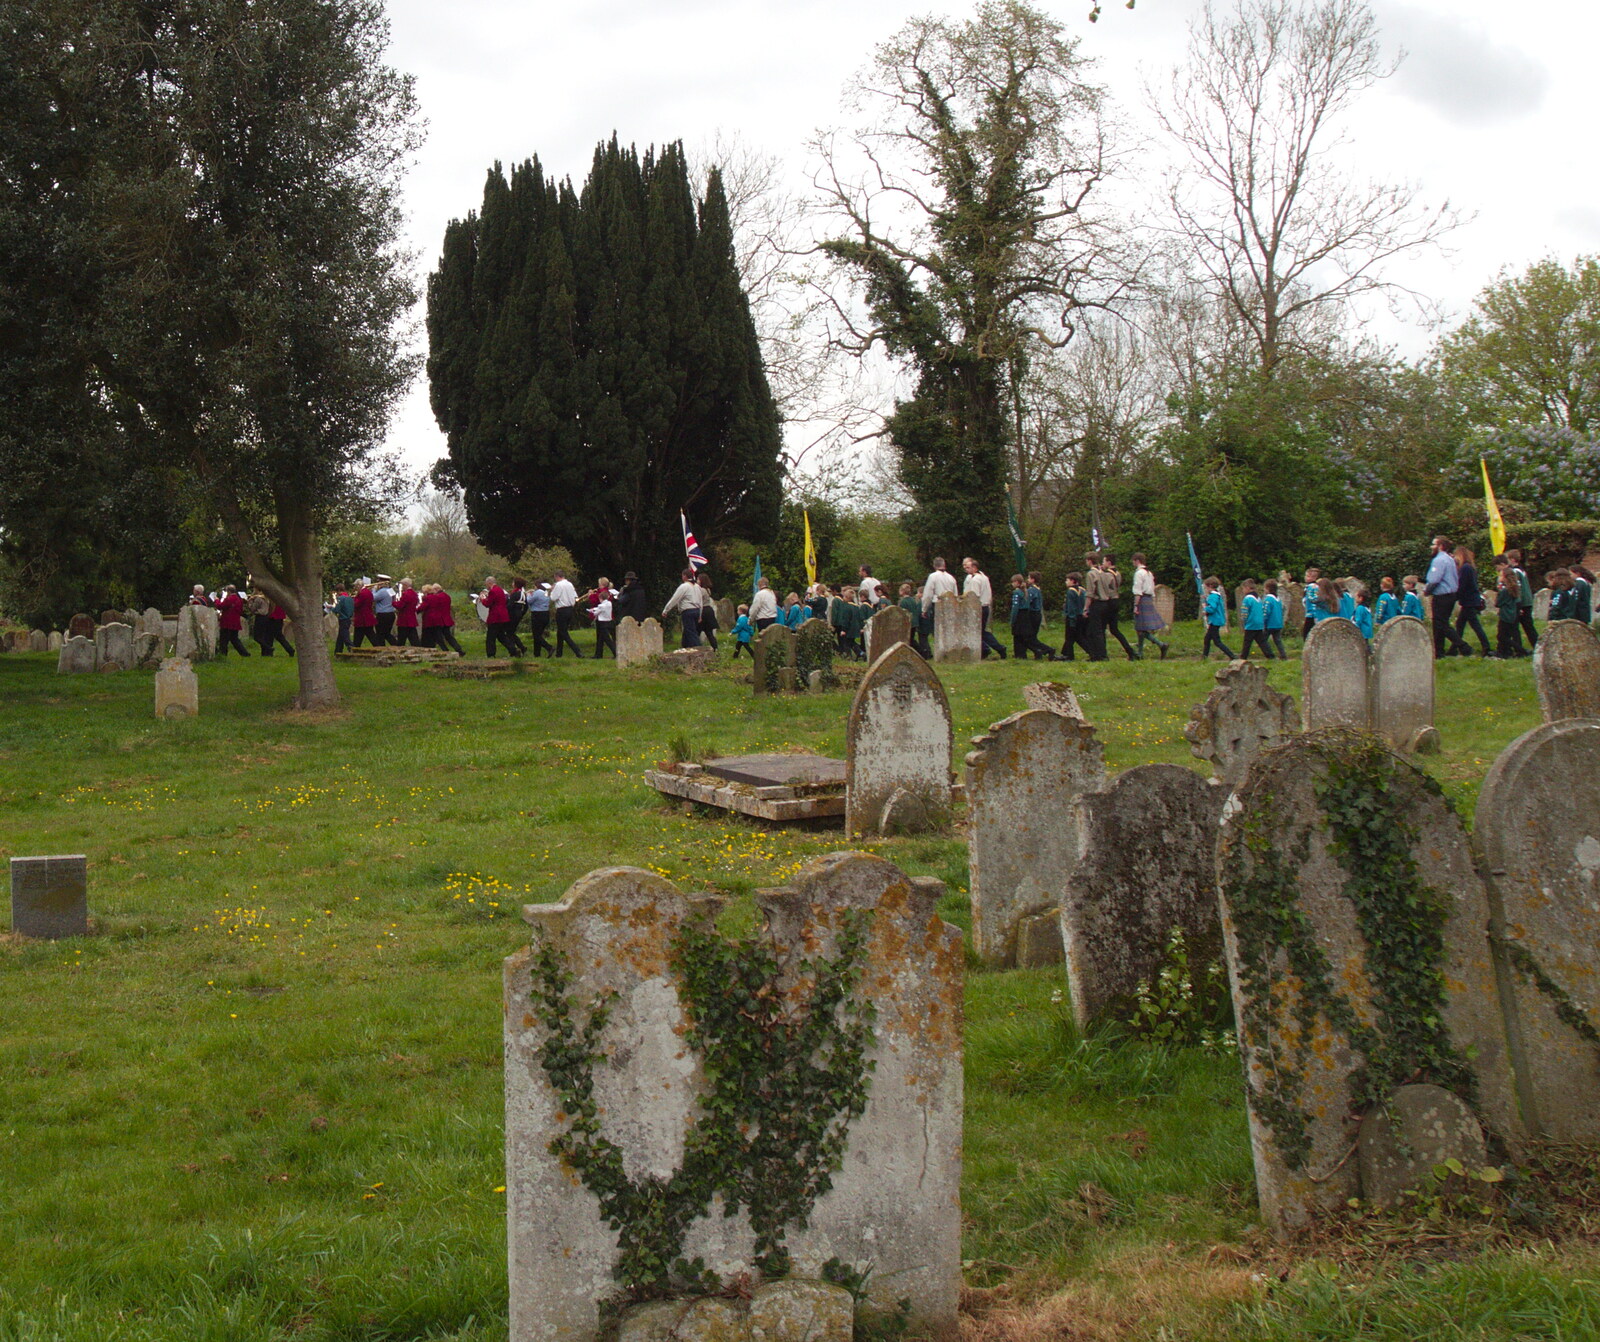 The procession passes through the graveyard from A St. George's Day Parade, Dickleburgh, Norfolk - 28th April 2019